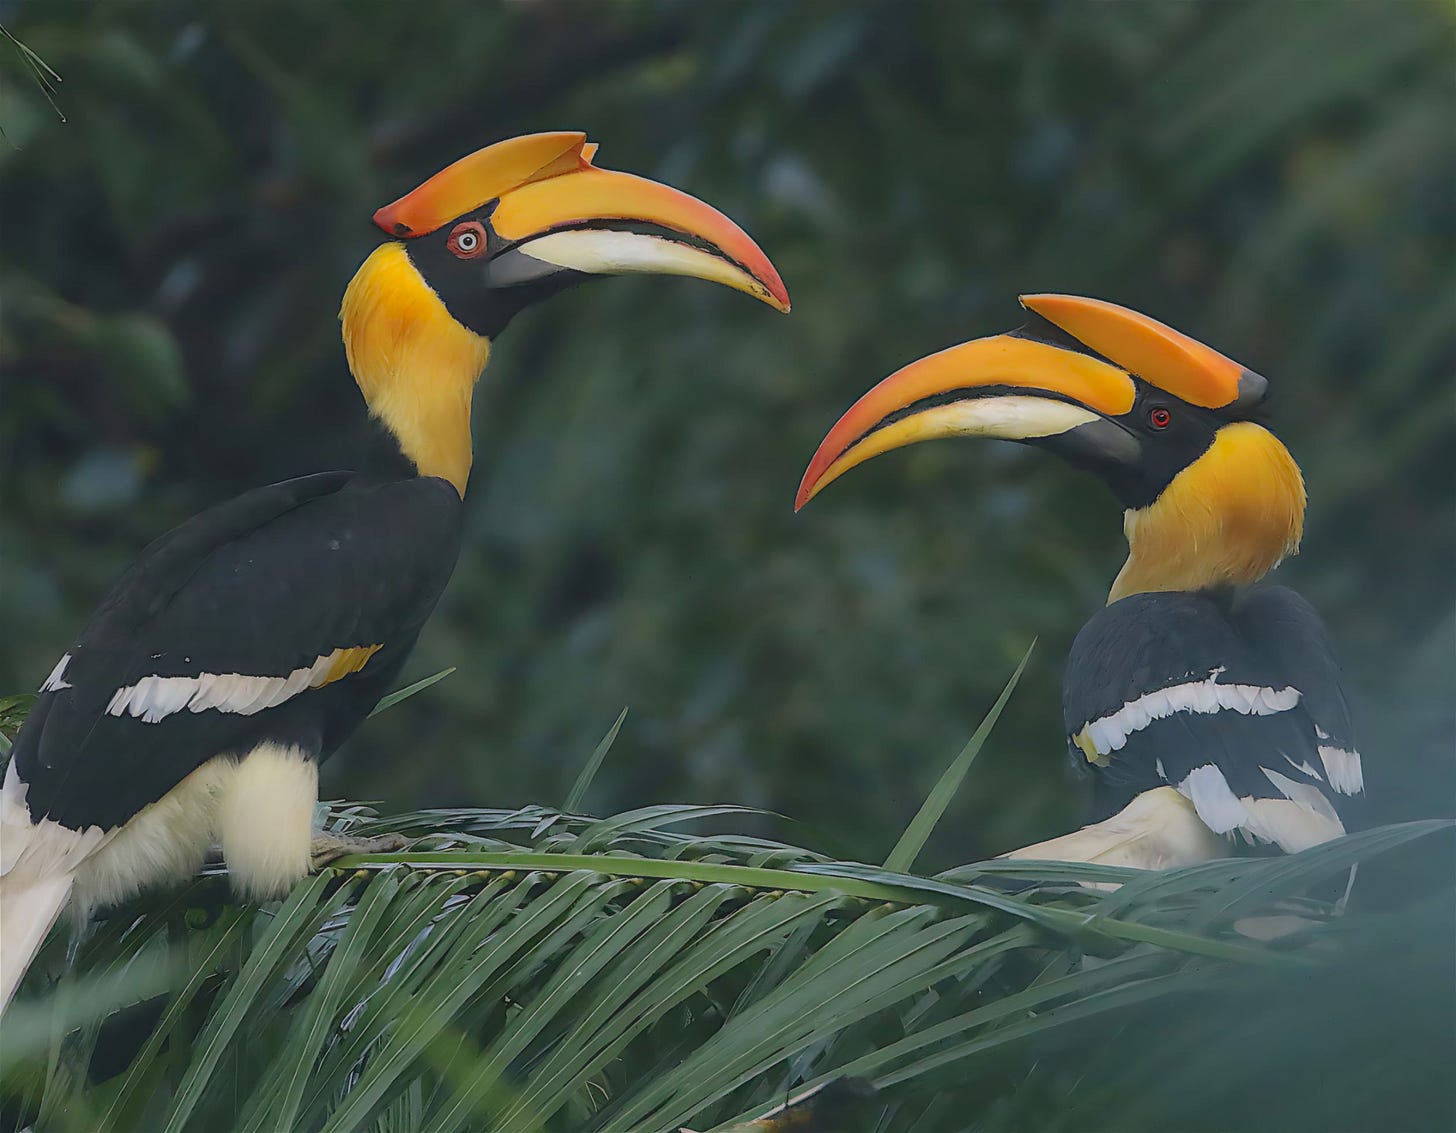 two great hornbills face each other on a palm frond. their beaks and casks are yellow, their plumage is black and white. 